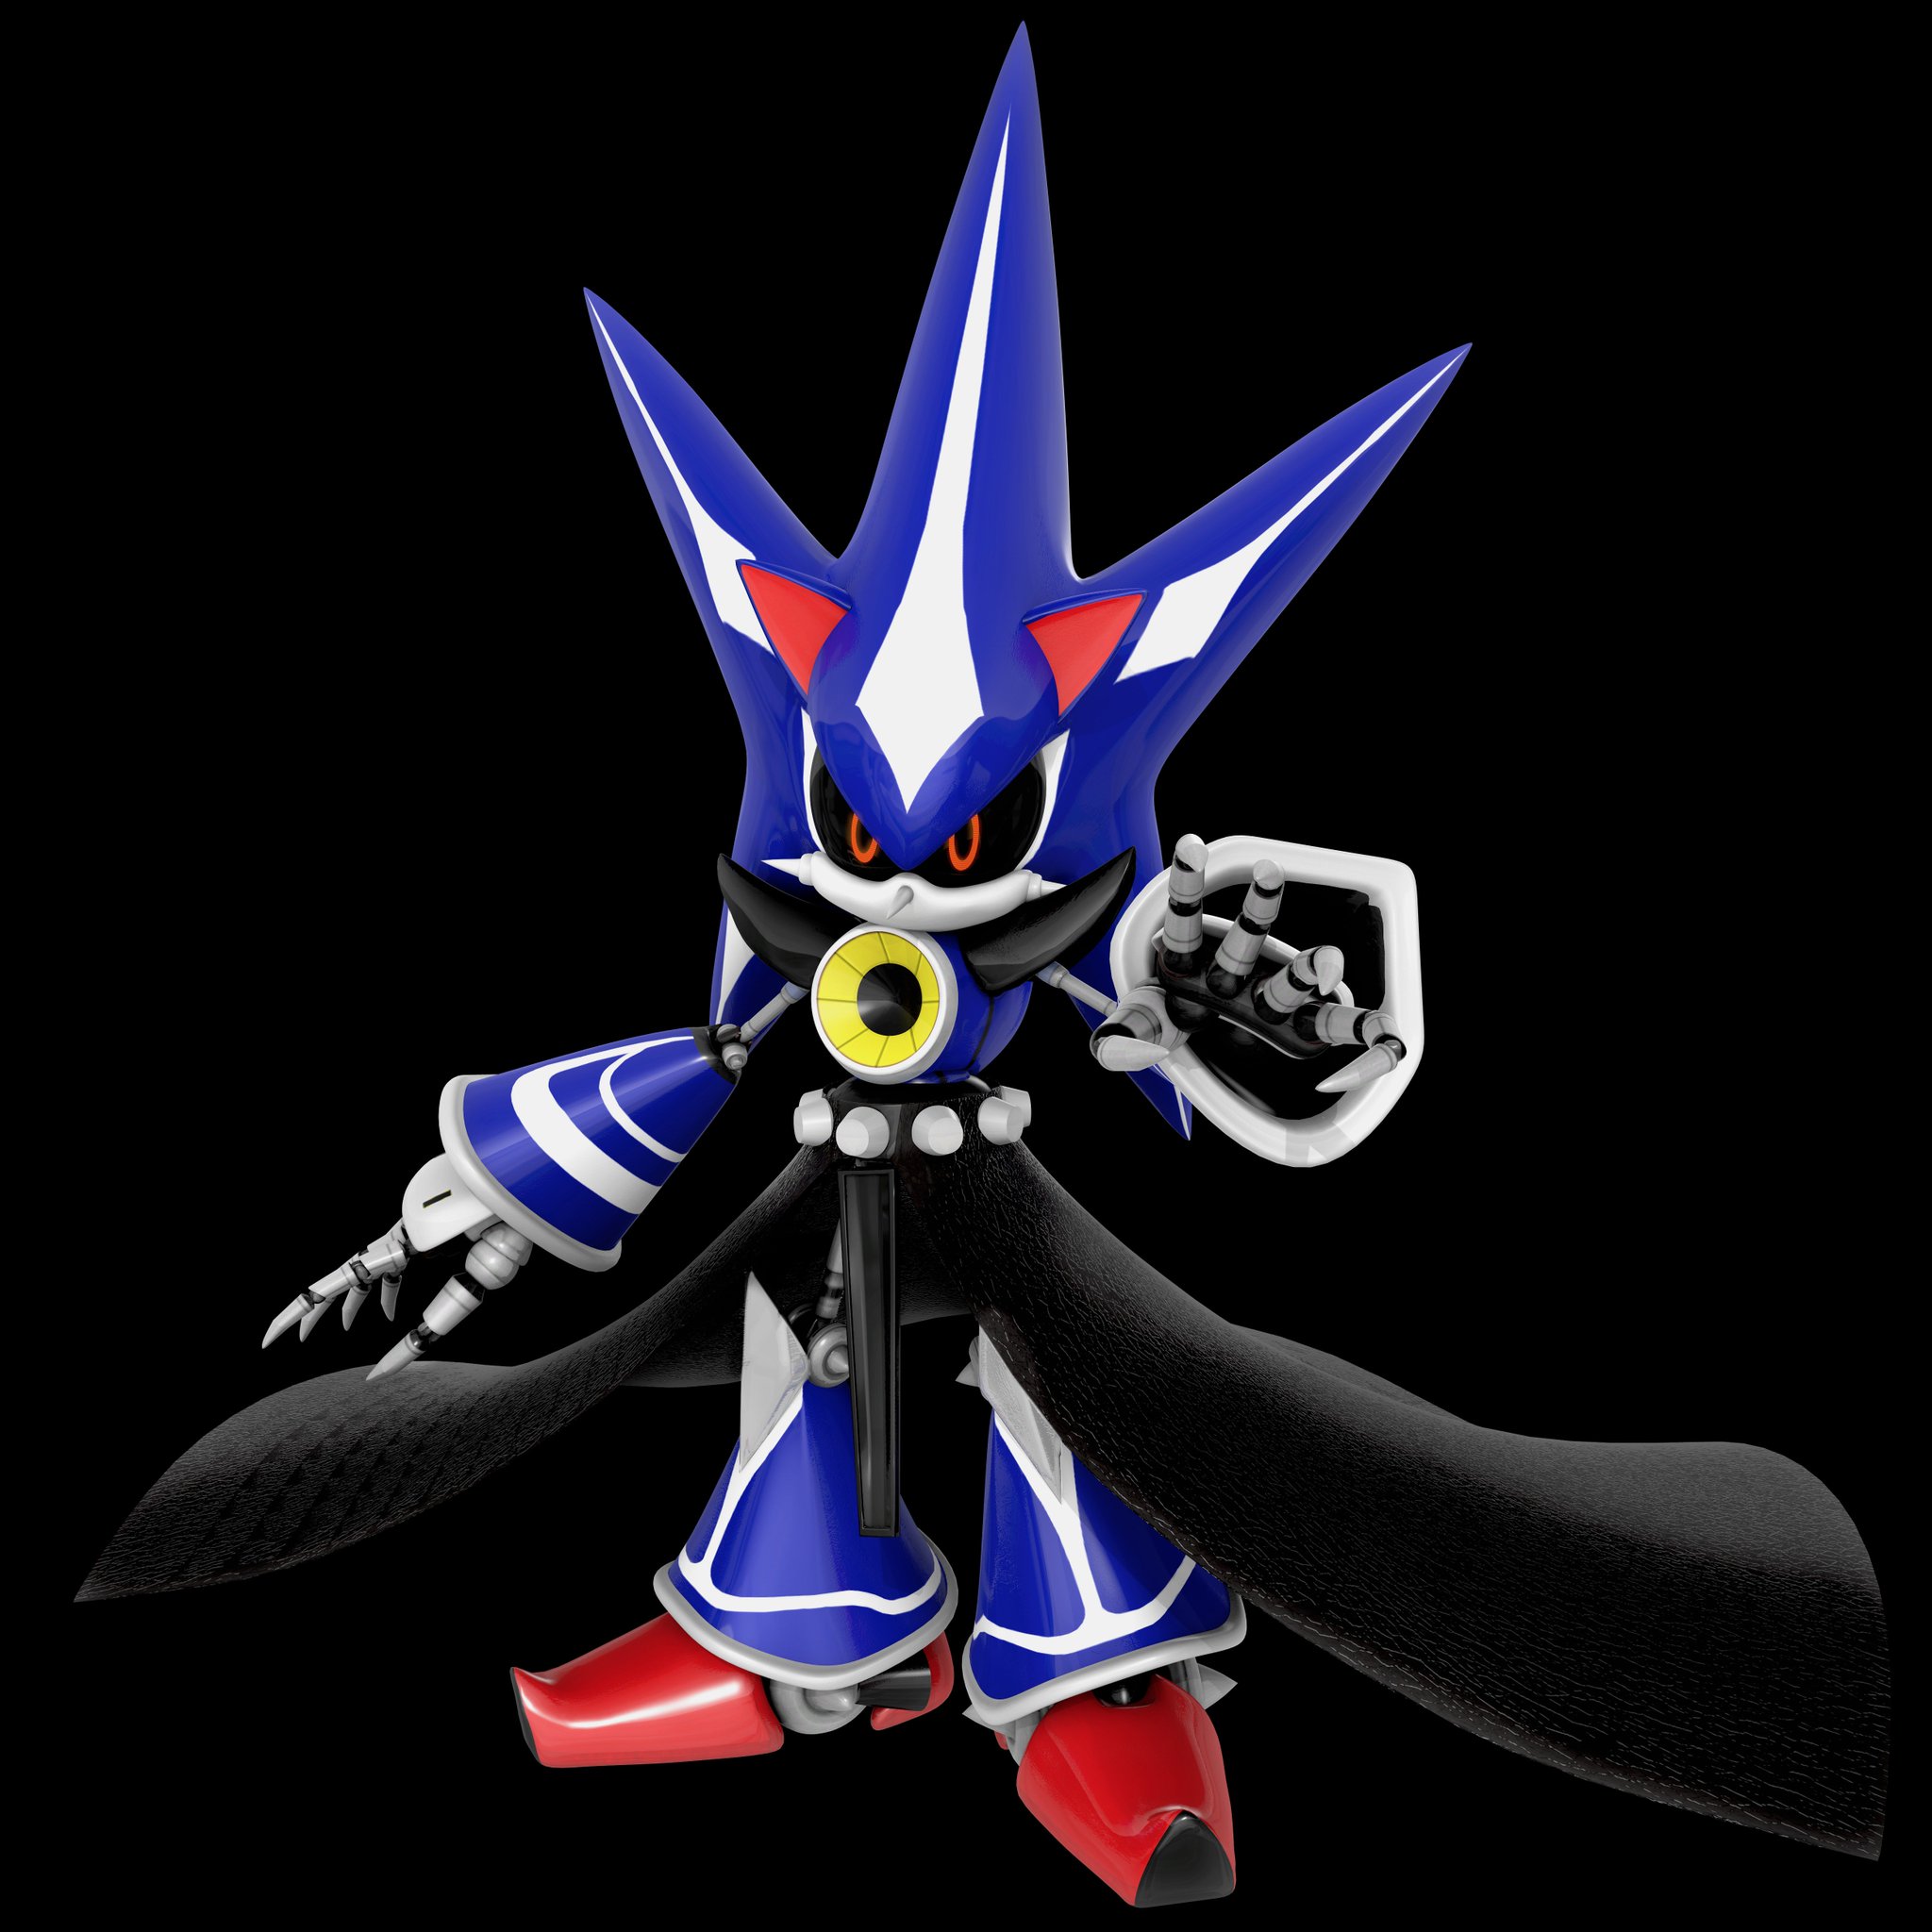 Neo Metal Sonic render! Took me about a week from start to finish but I'm  done now! (cloth physics are baking for an animated version to show off the  cape- will post